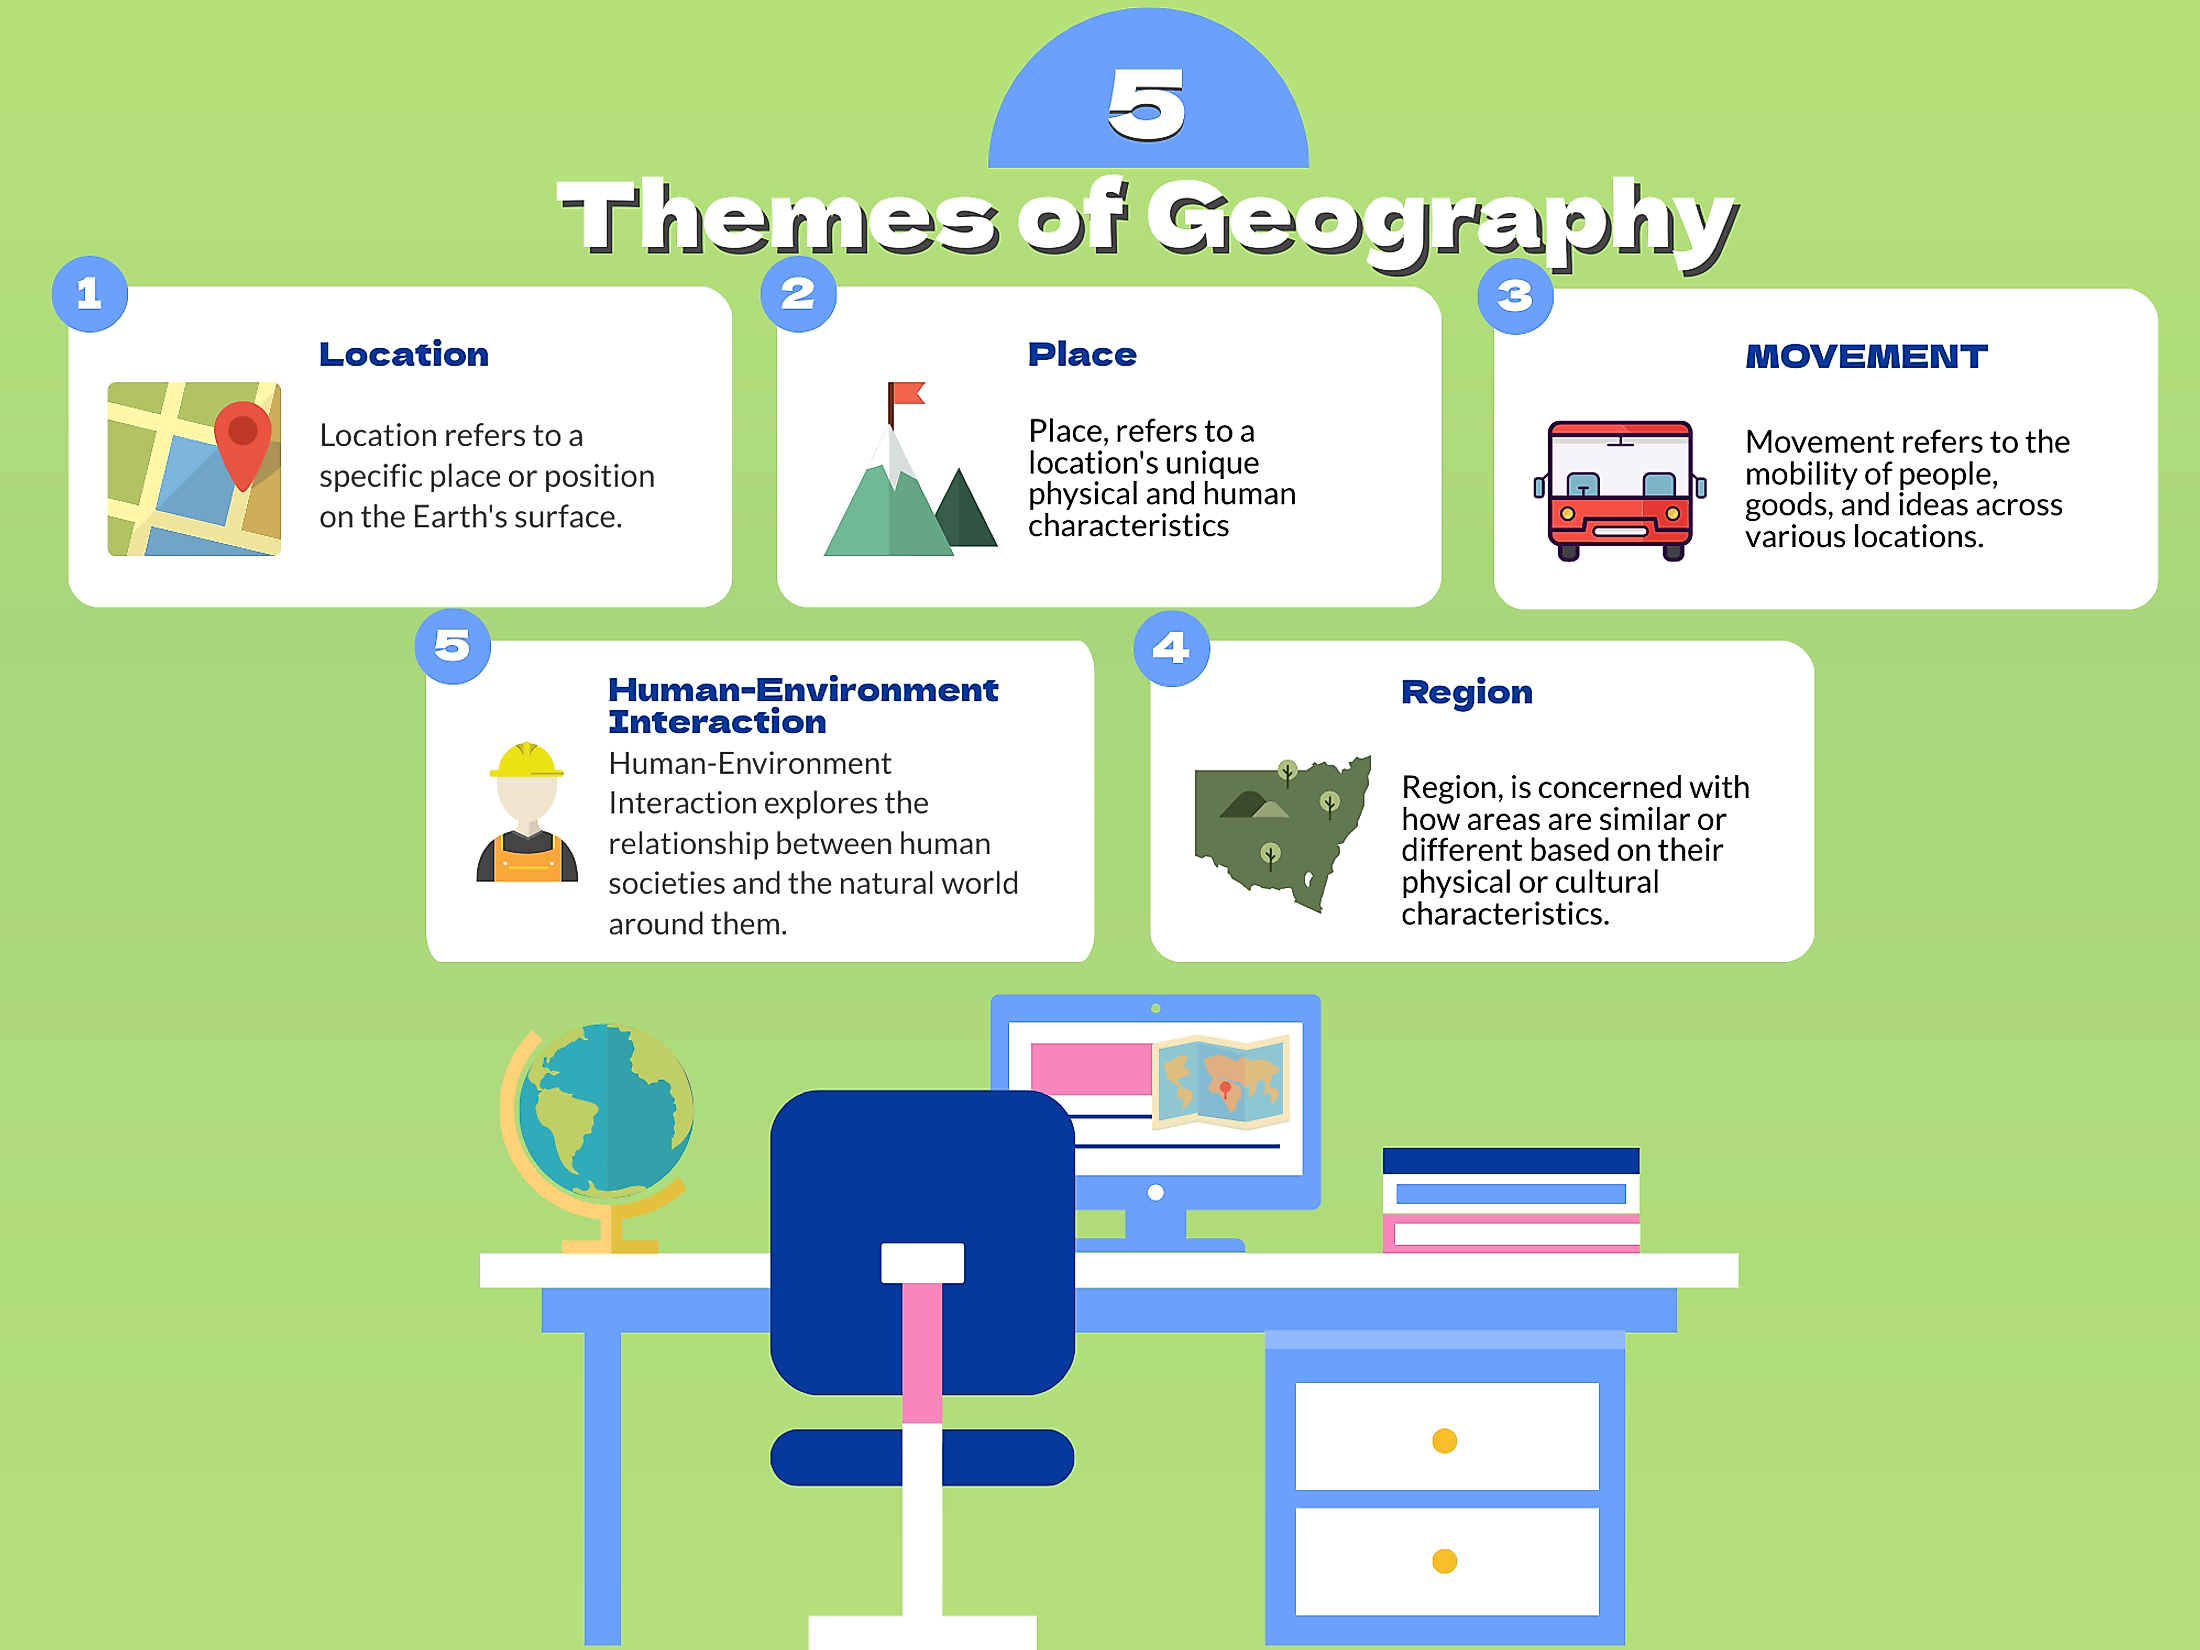 What is location in the 5 themes of geography?